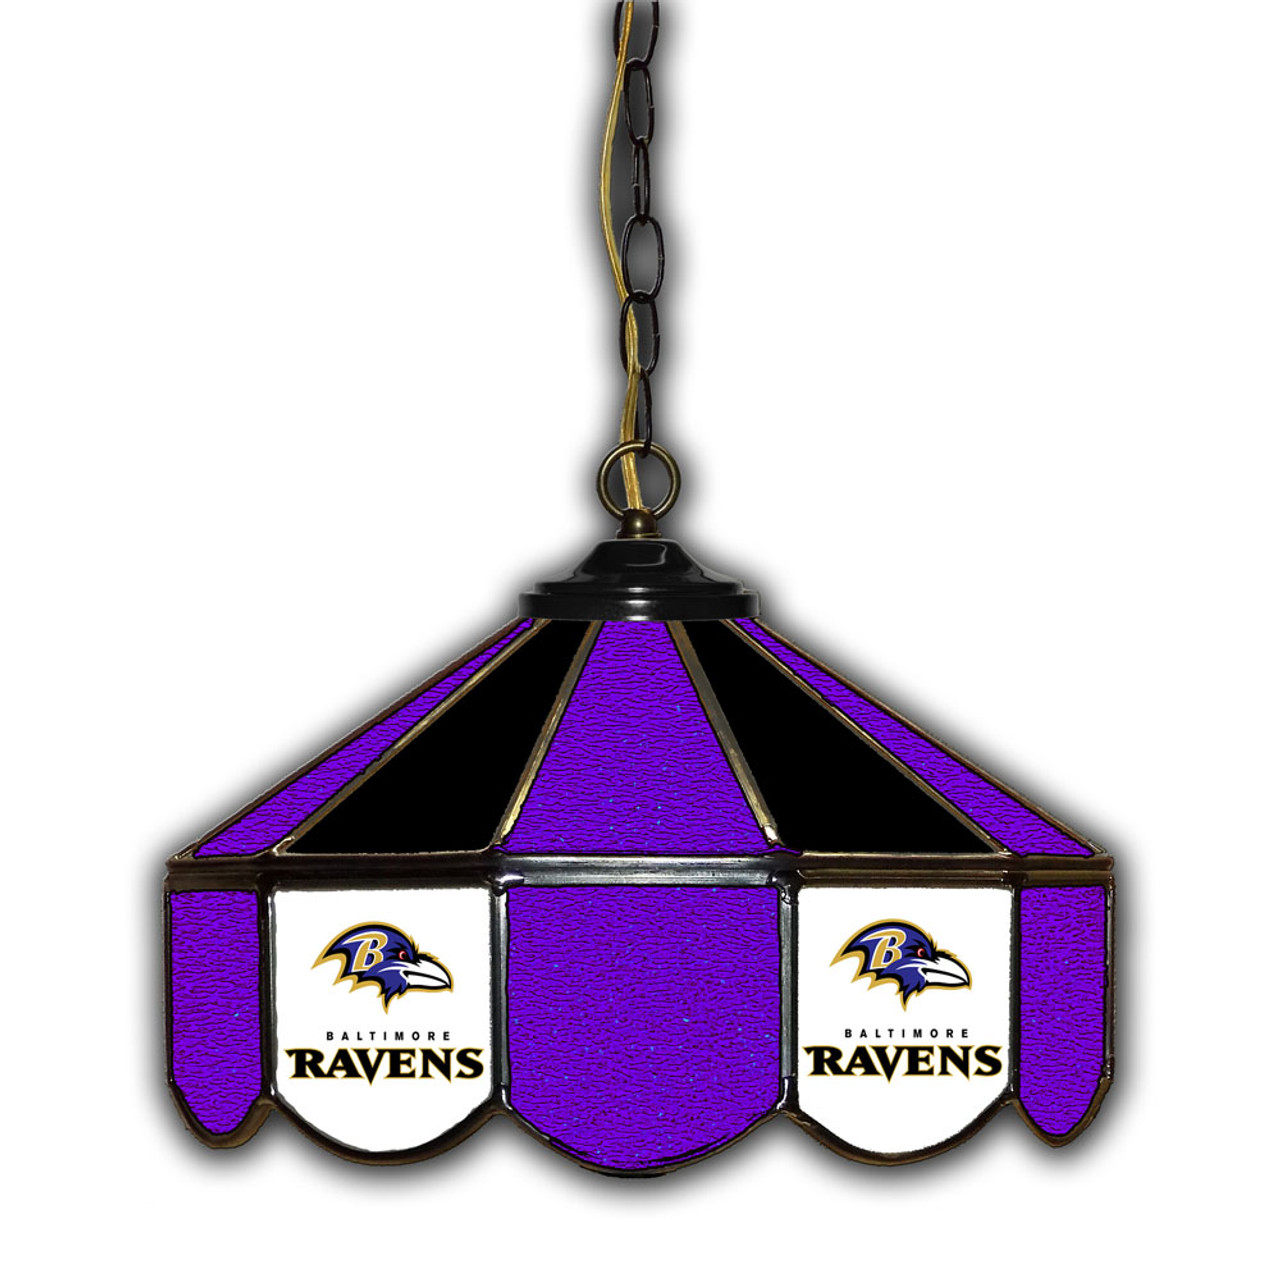 133-1025, Baltimore, Ravens, 14", Glass, Pub, Light, FREE SHIPPING, Hanging, Imperial